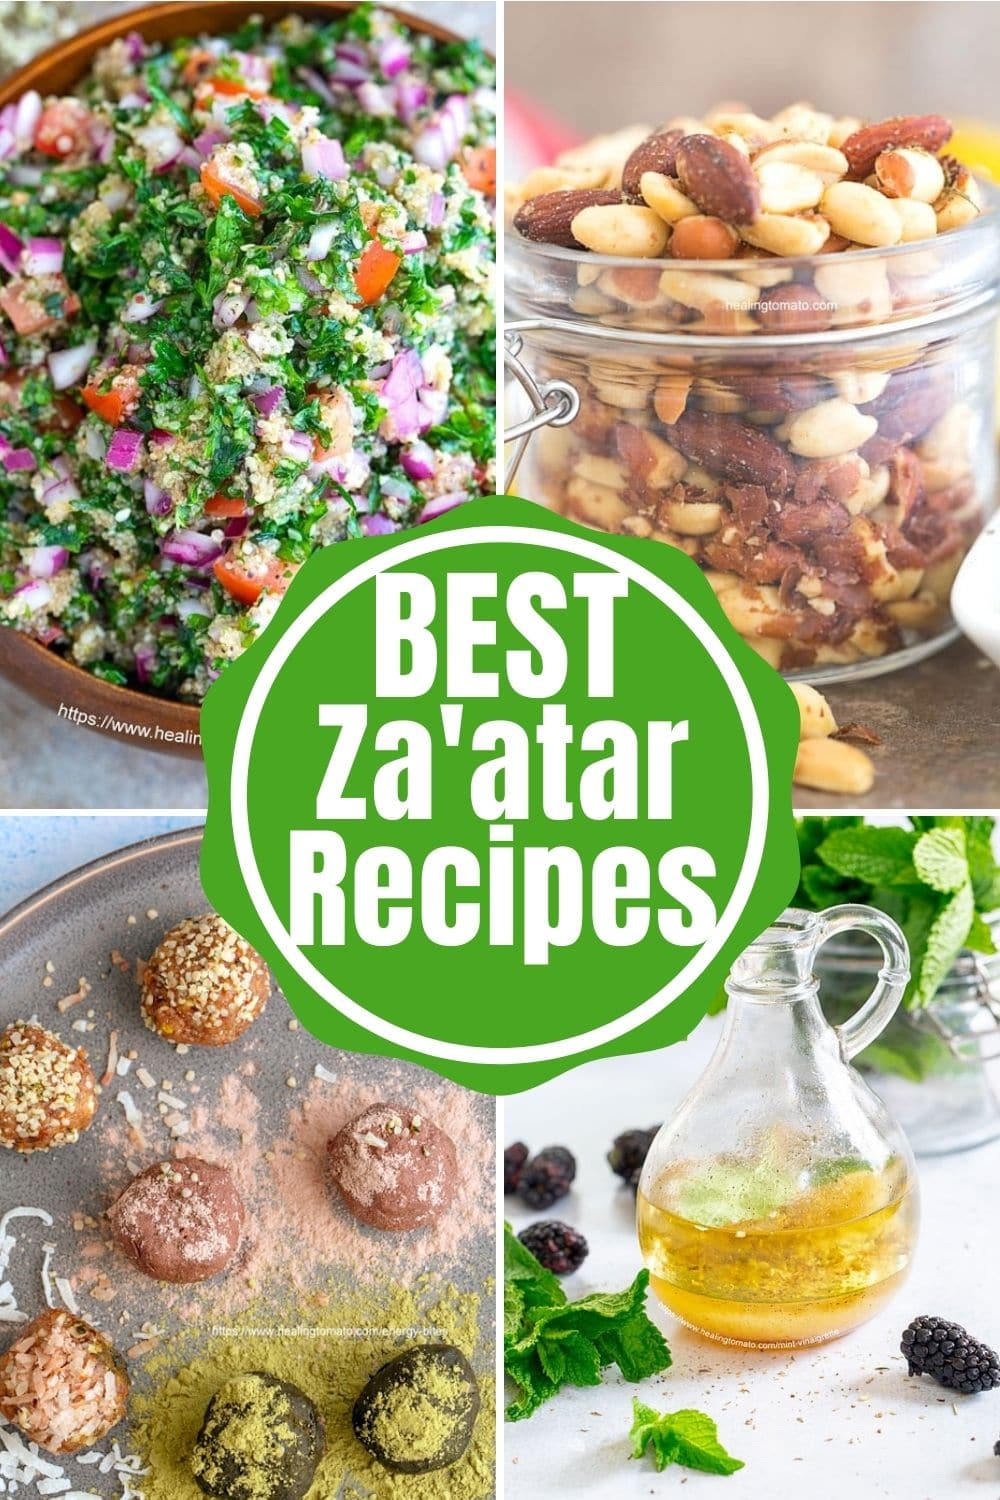 Collage of 4 images with the words "Best Za'atar Recipes" written in the middle